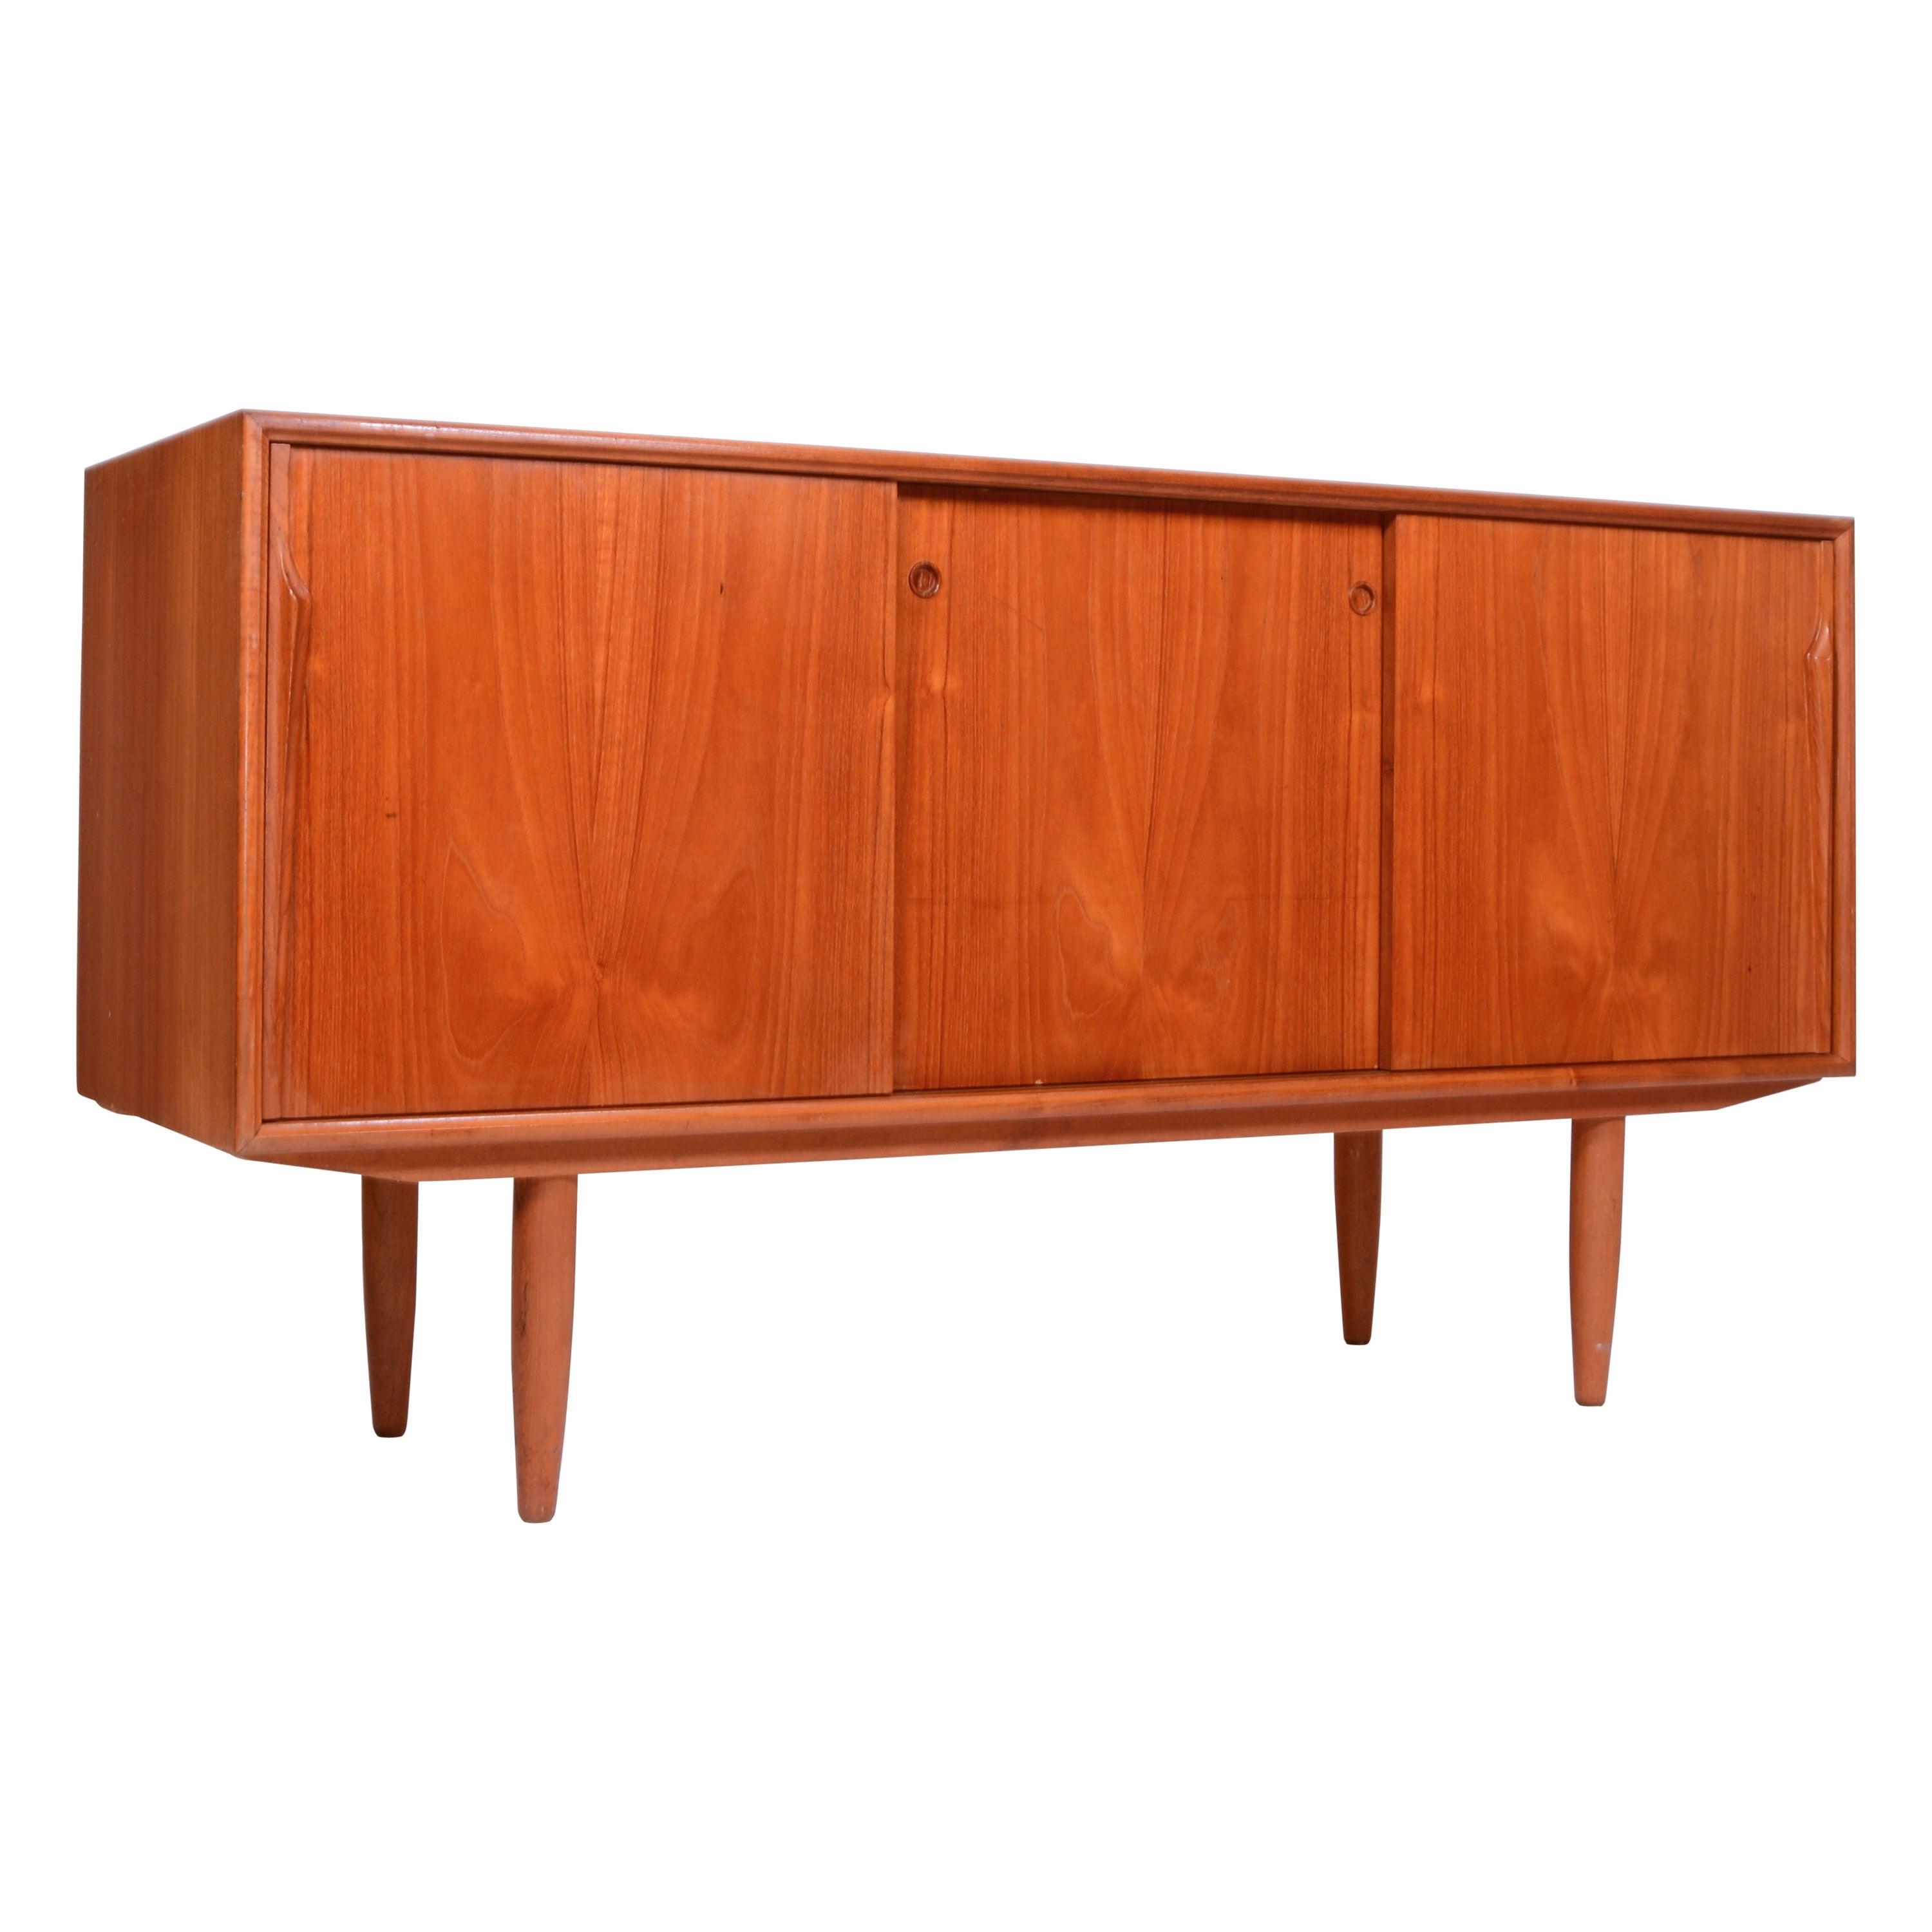 Gunni Omann Teak Credenza with Adjustable Shelf and Dovetailed Drawers